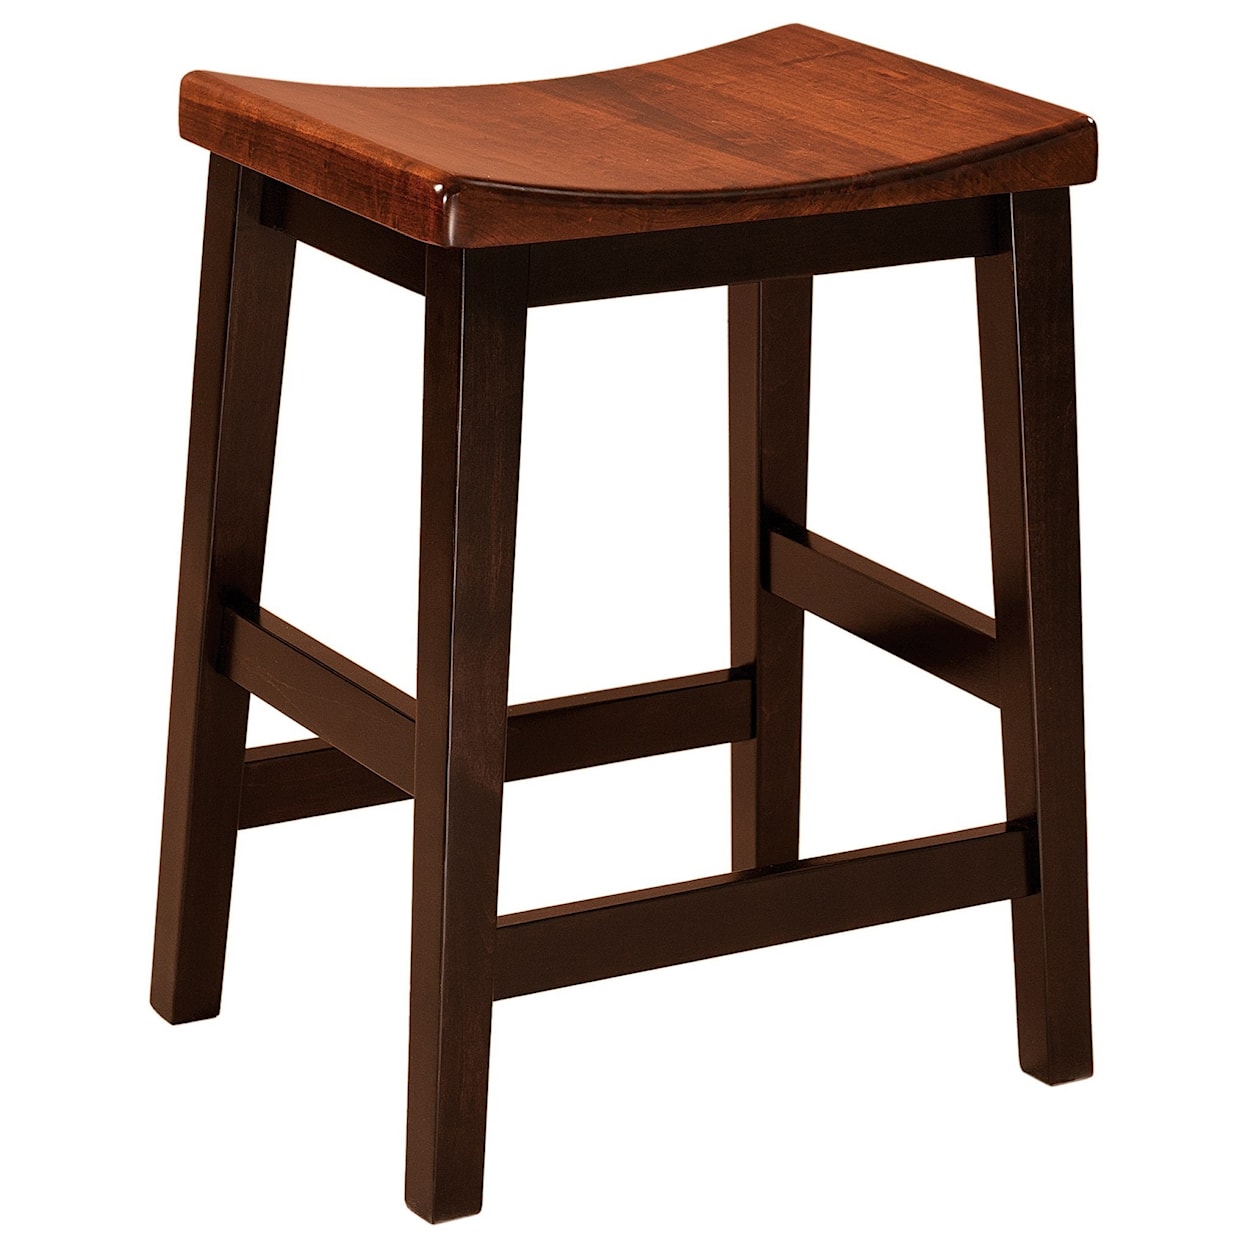 F&N Woodworking Coby Bar Stool 30" Height - Leather Seat